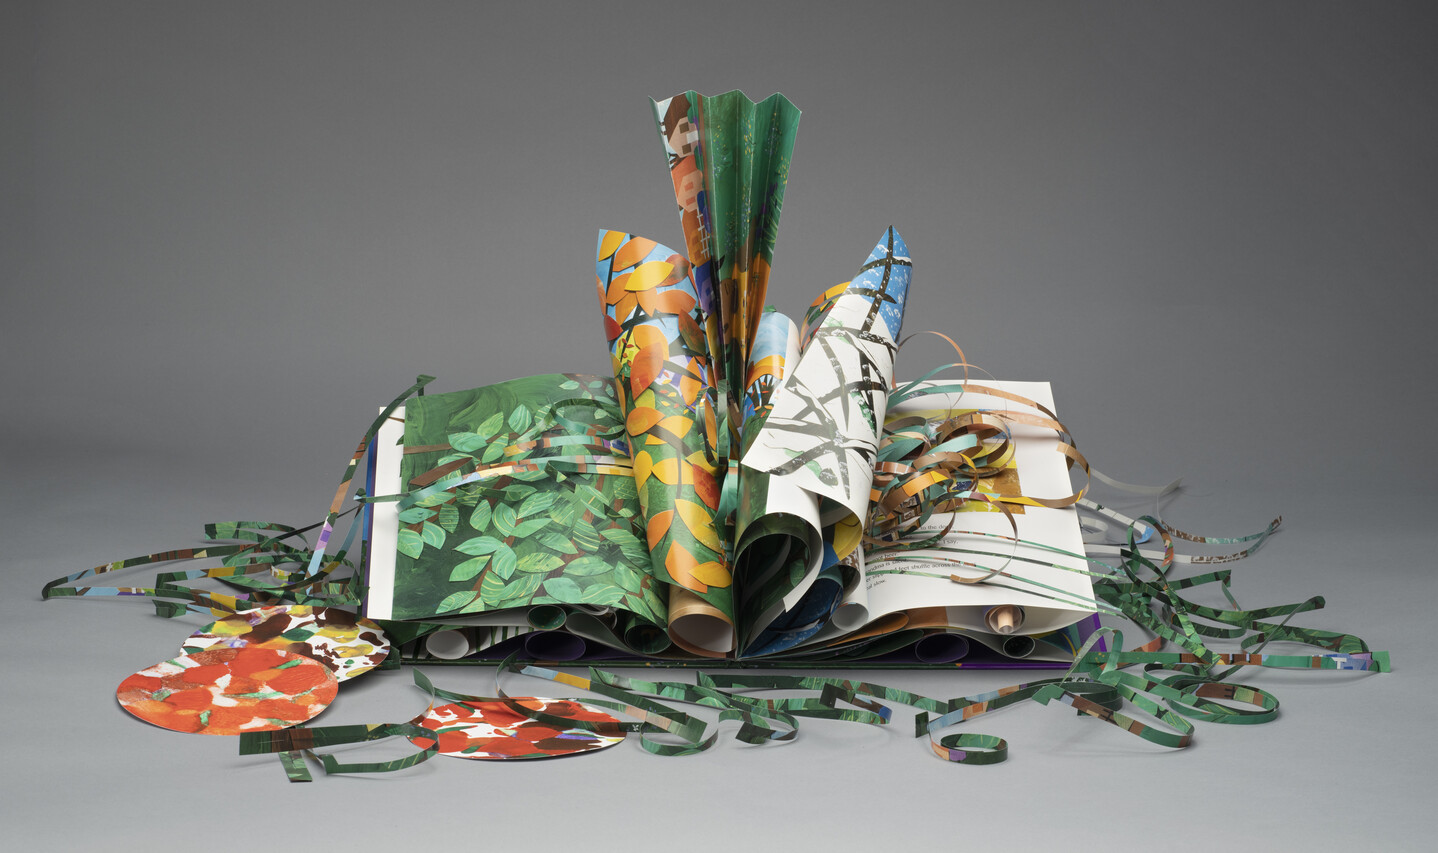 An artist's book made of colorful green, yellow, brown, orange, and red paper. Several of the pages are curled and folded. Other paper is cut into strips and circles and displayed around the book.